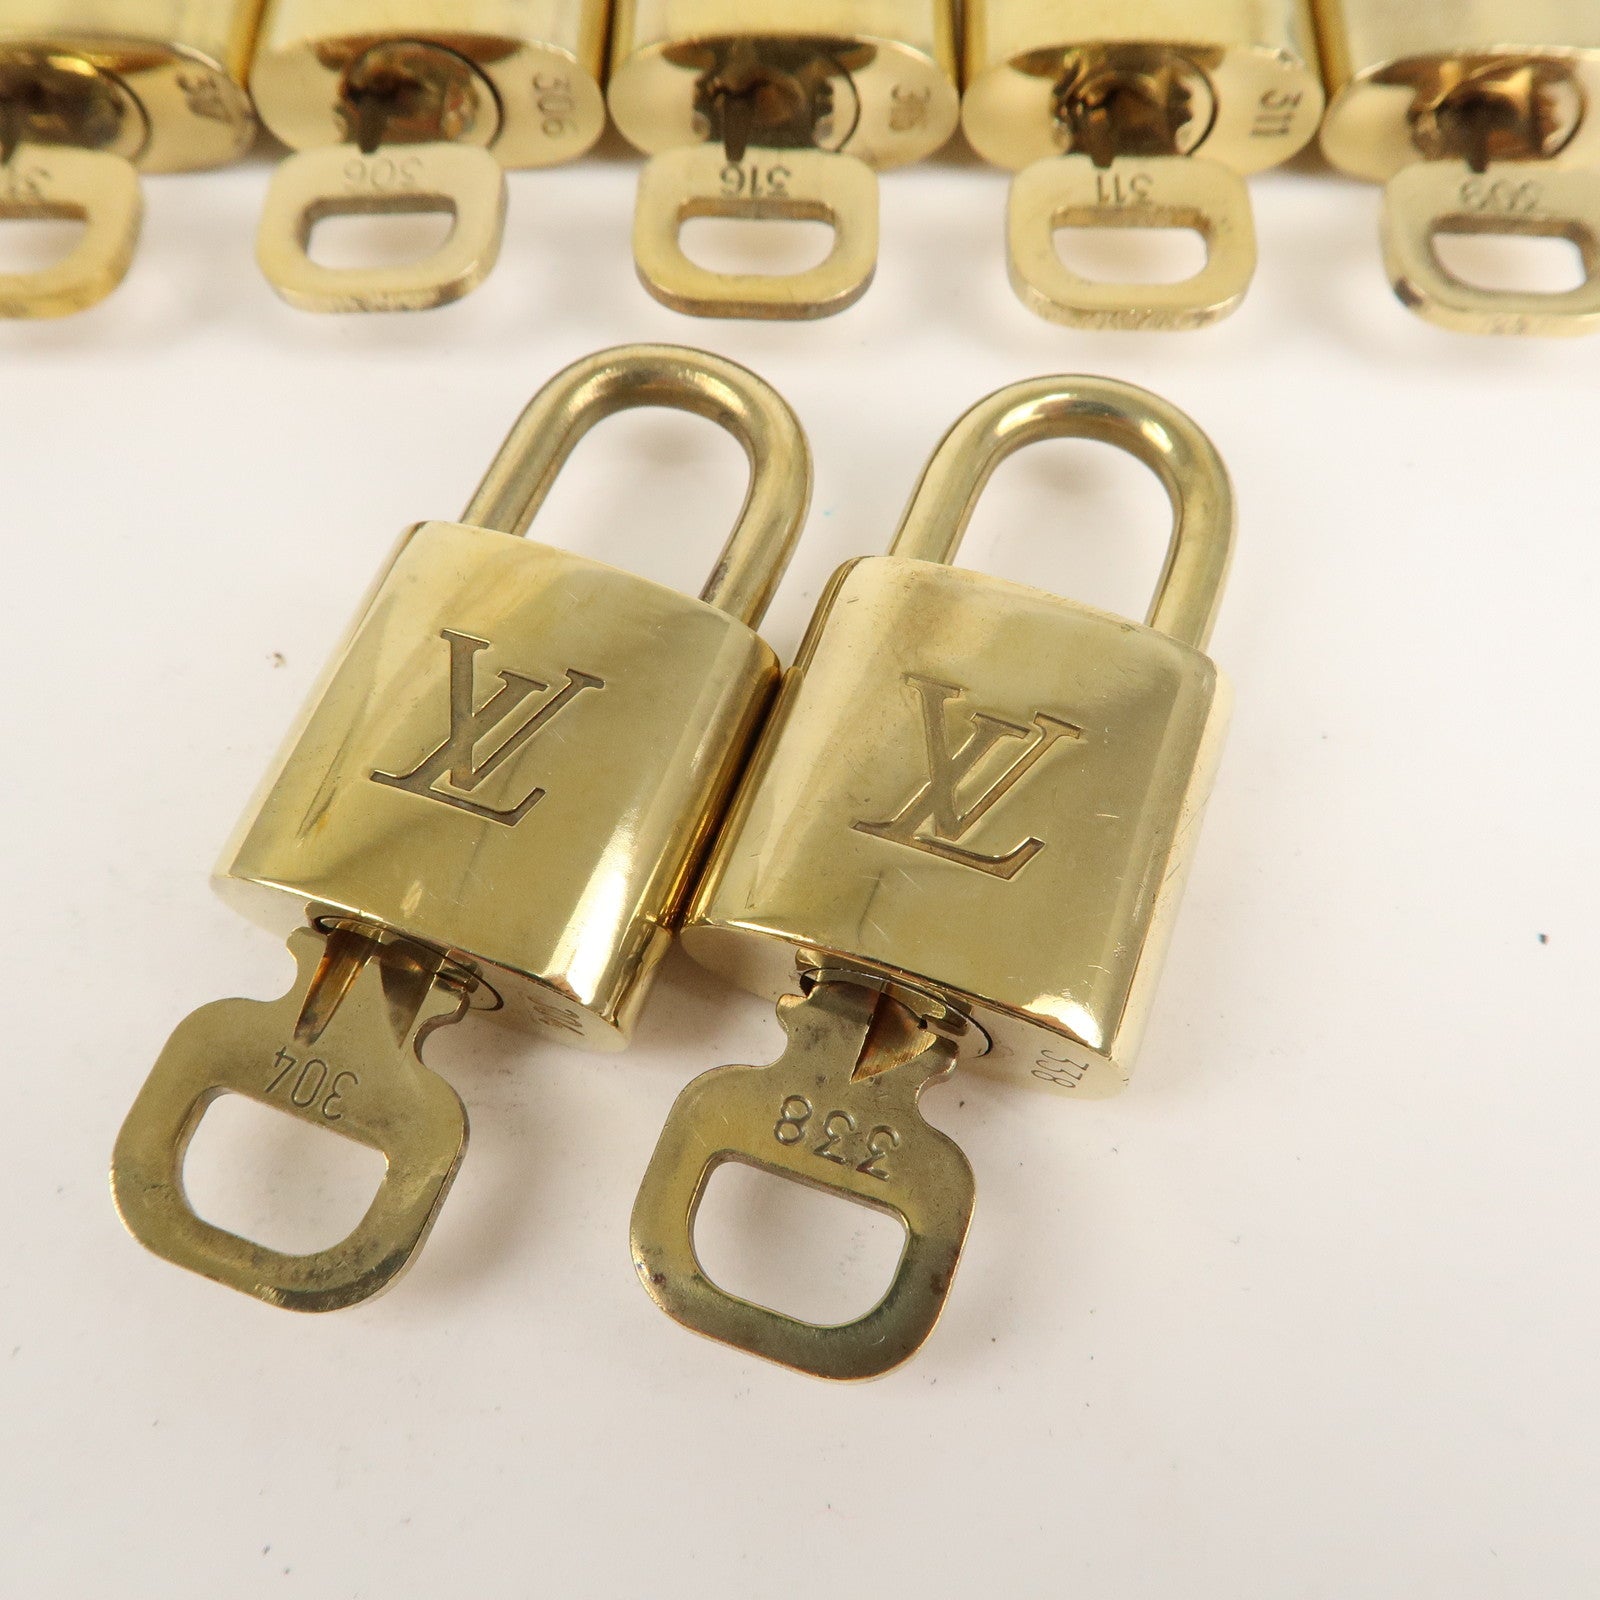 Louis Vuitton Two Padlocks and Keys 318 and 338 Lock Brass 